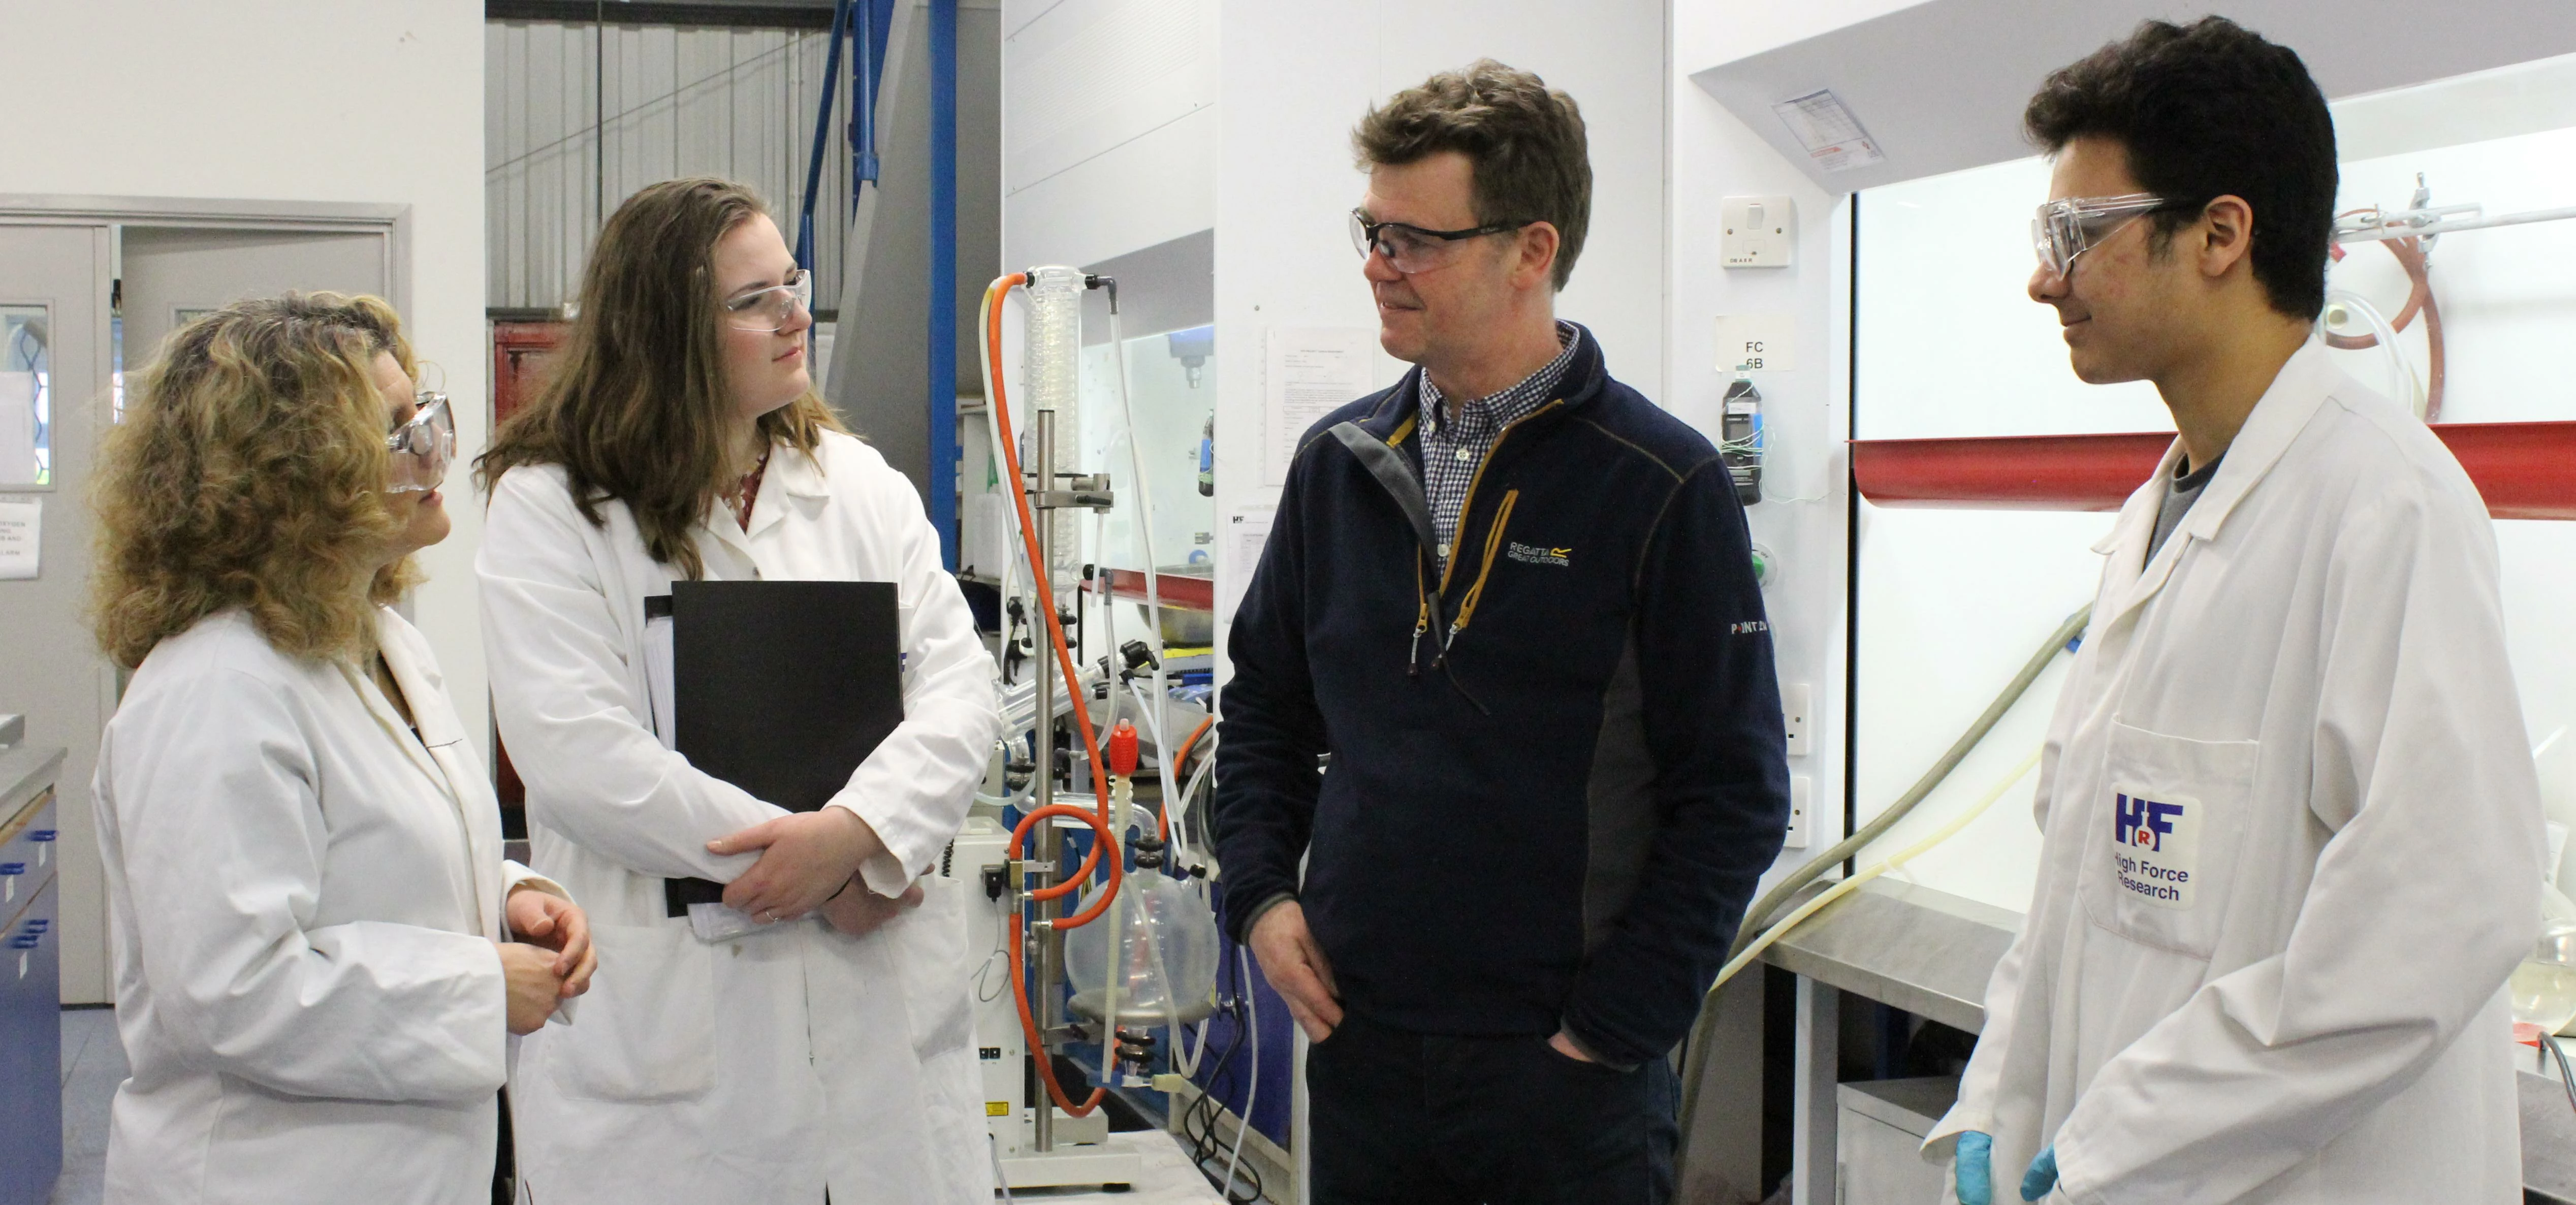 Royal Society of Chemistry director, Clare Viney, spends day as apprentice to celebrate National App